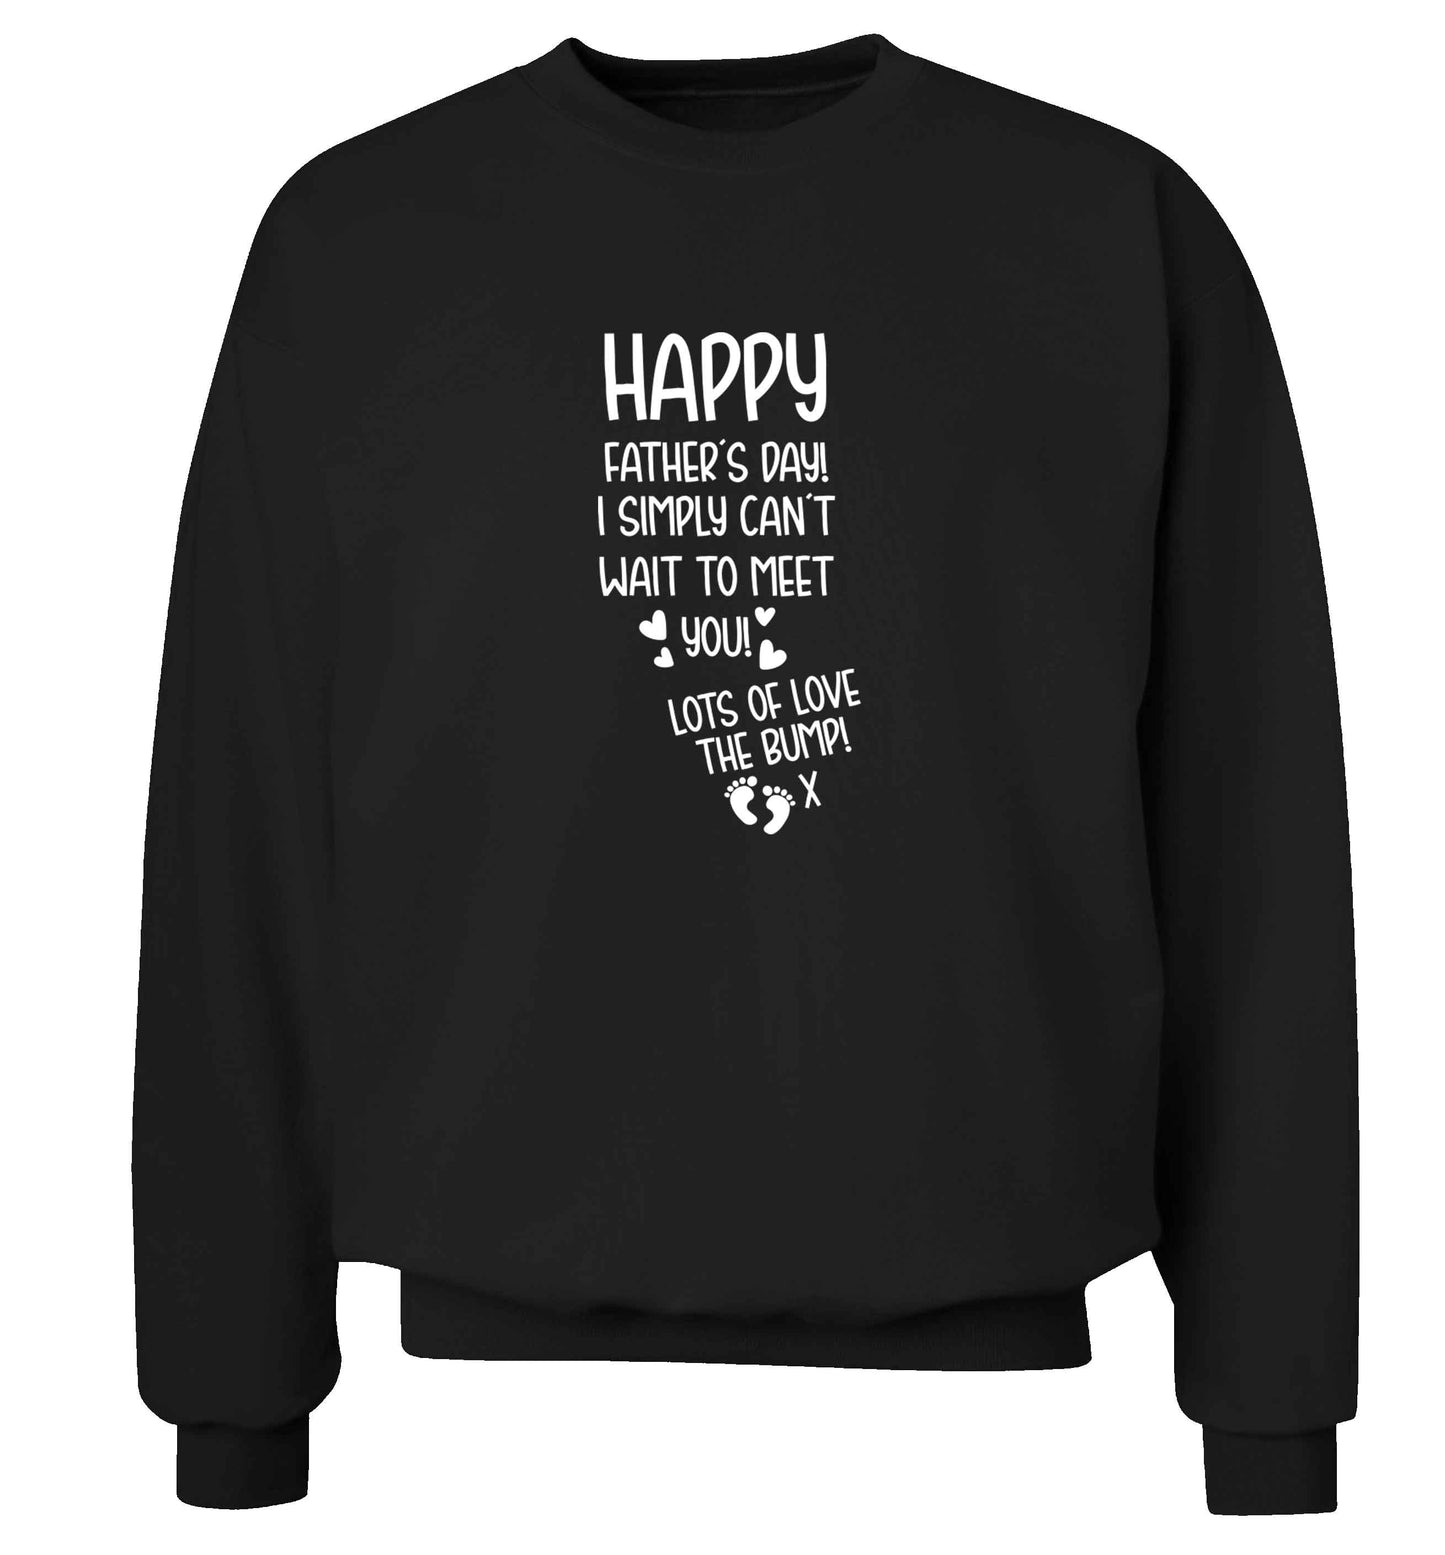 Happy Father's day daddy I can't wait to meet you lot's of love the bump! adult's unisex black sweater 2XL